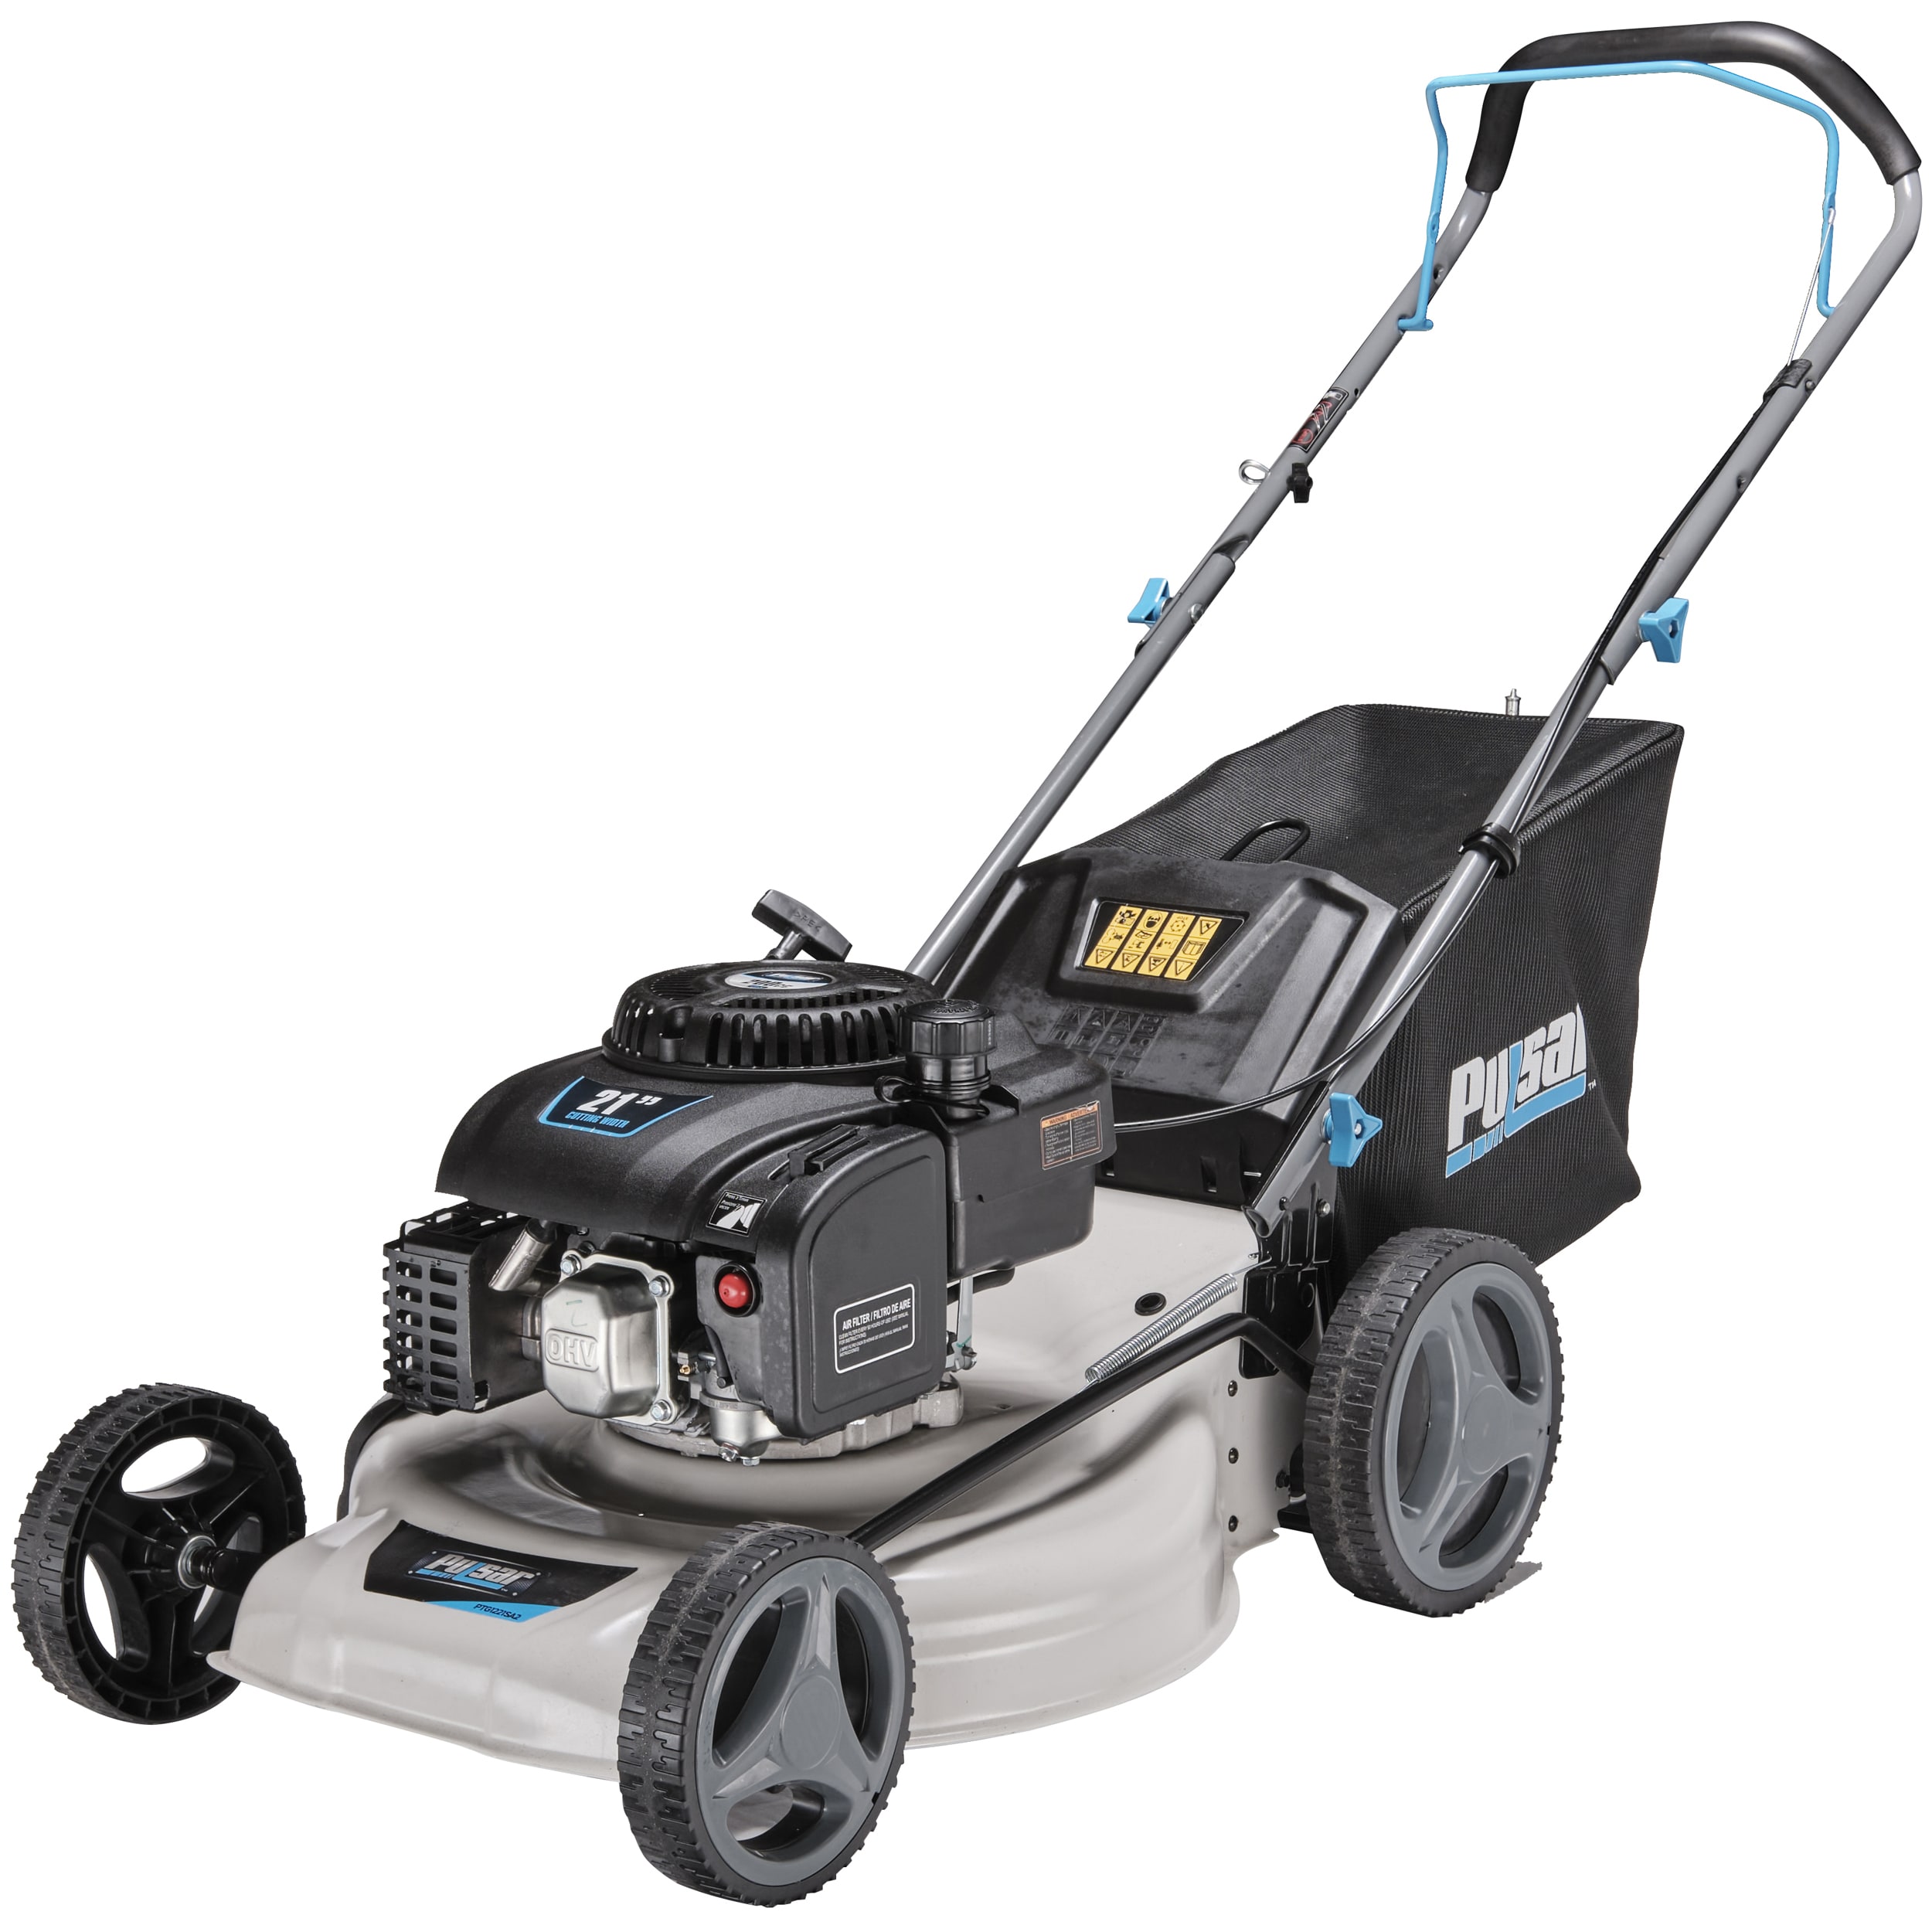 Reviews for Pulsar 21 in. 200 cc Gas Recoil Start, Walk Behind Push Mower,  Self-Propelled 3-in-1 with 7 Position Height Adjustment